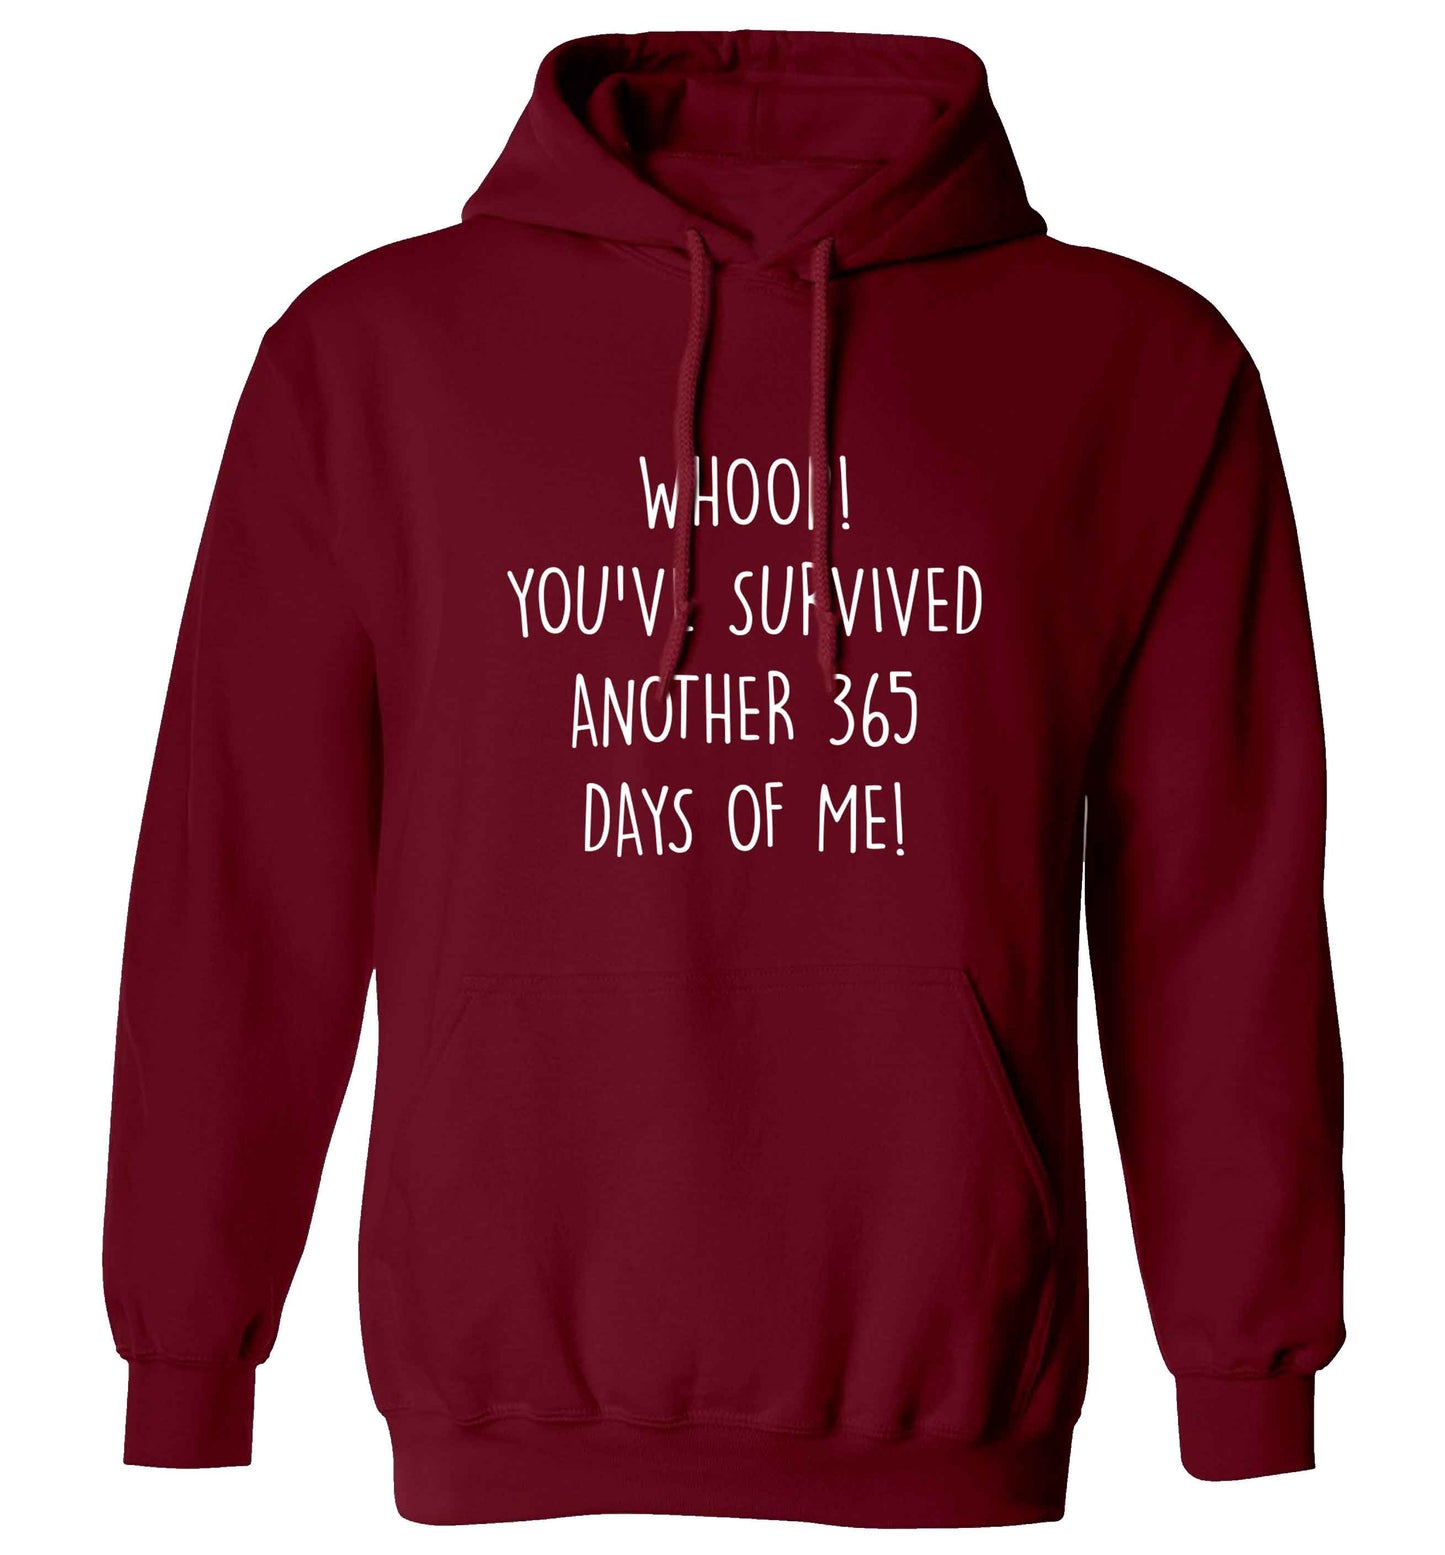 Whoop! You've survived another 365 days with me! adults unisex maroon hoodie 2XL